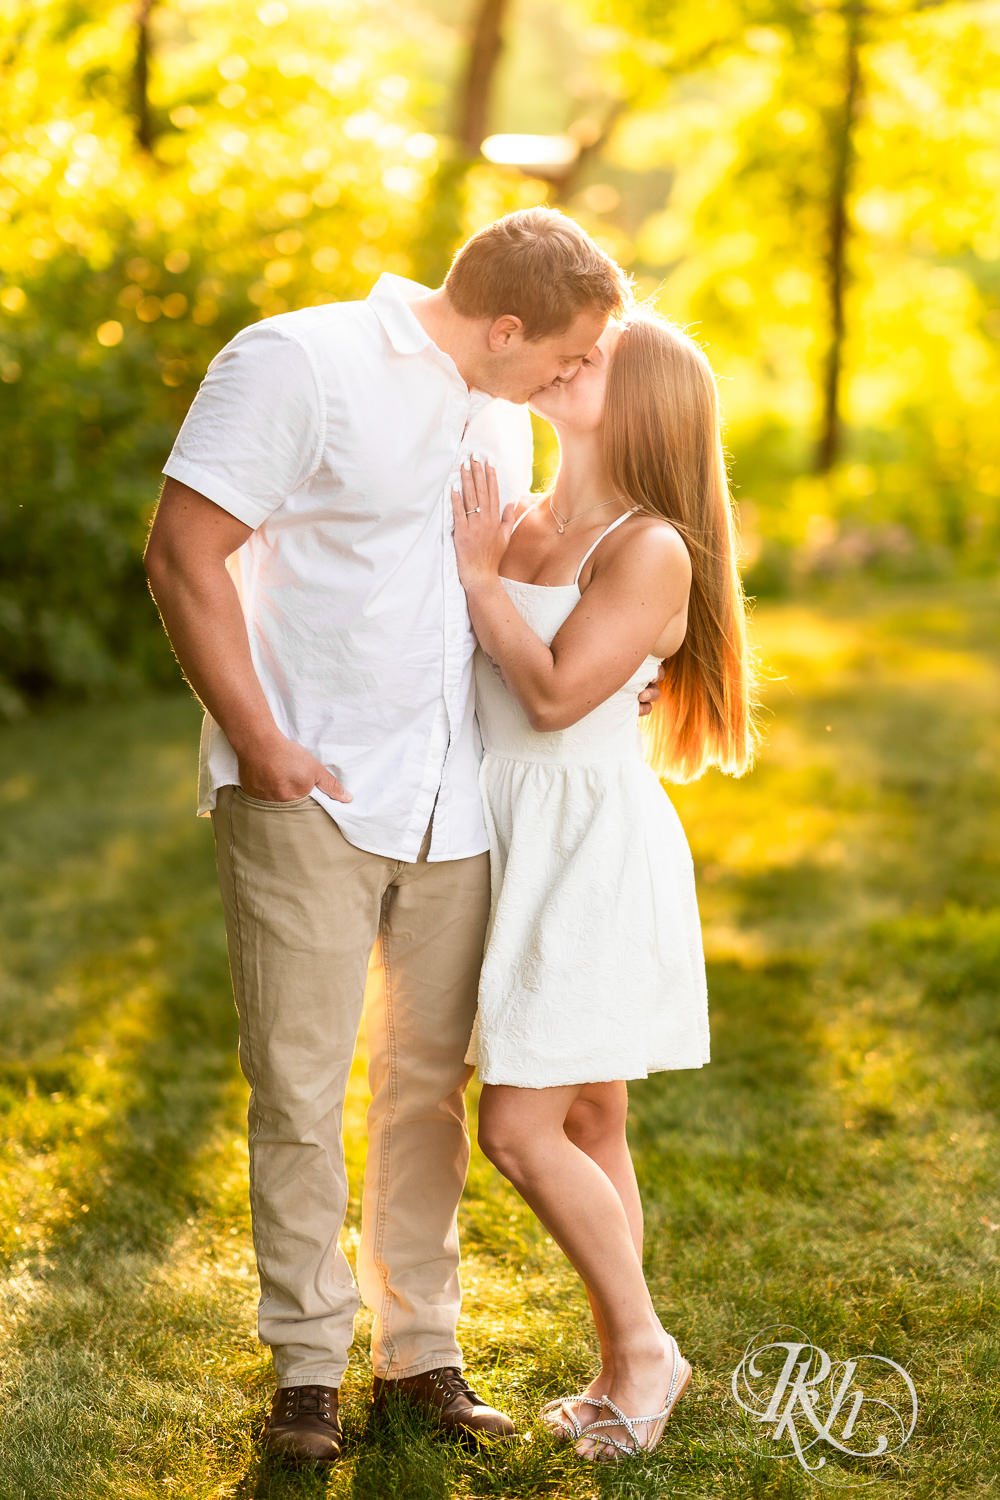 Man in white shirt and woman in white dress kiss during golden hour engagement photography at Lebanon Hills in Eagan, Minnesota.